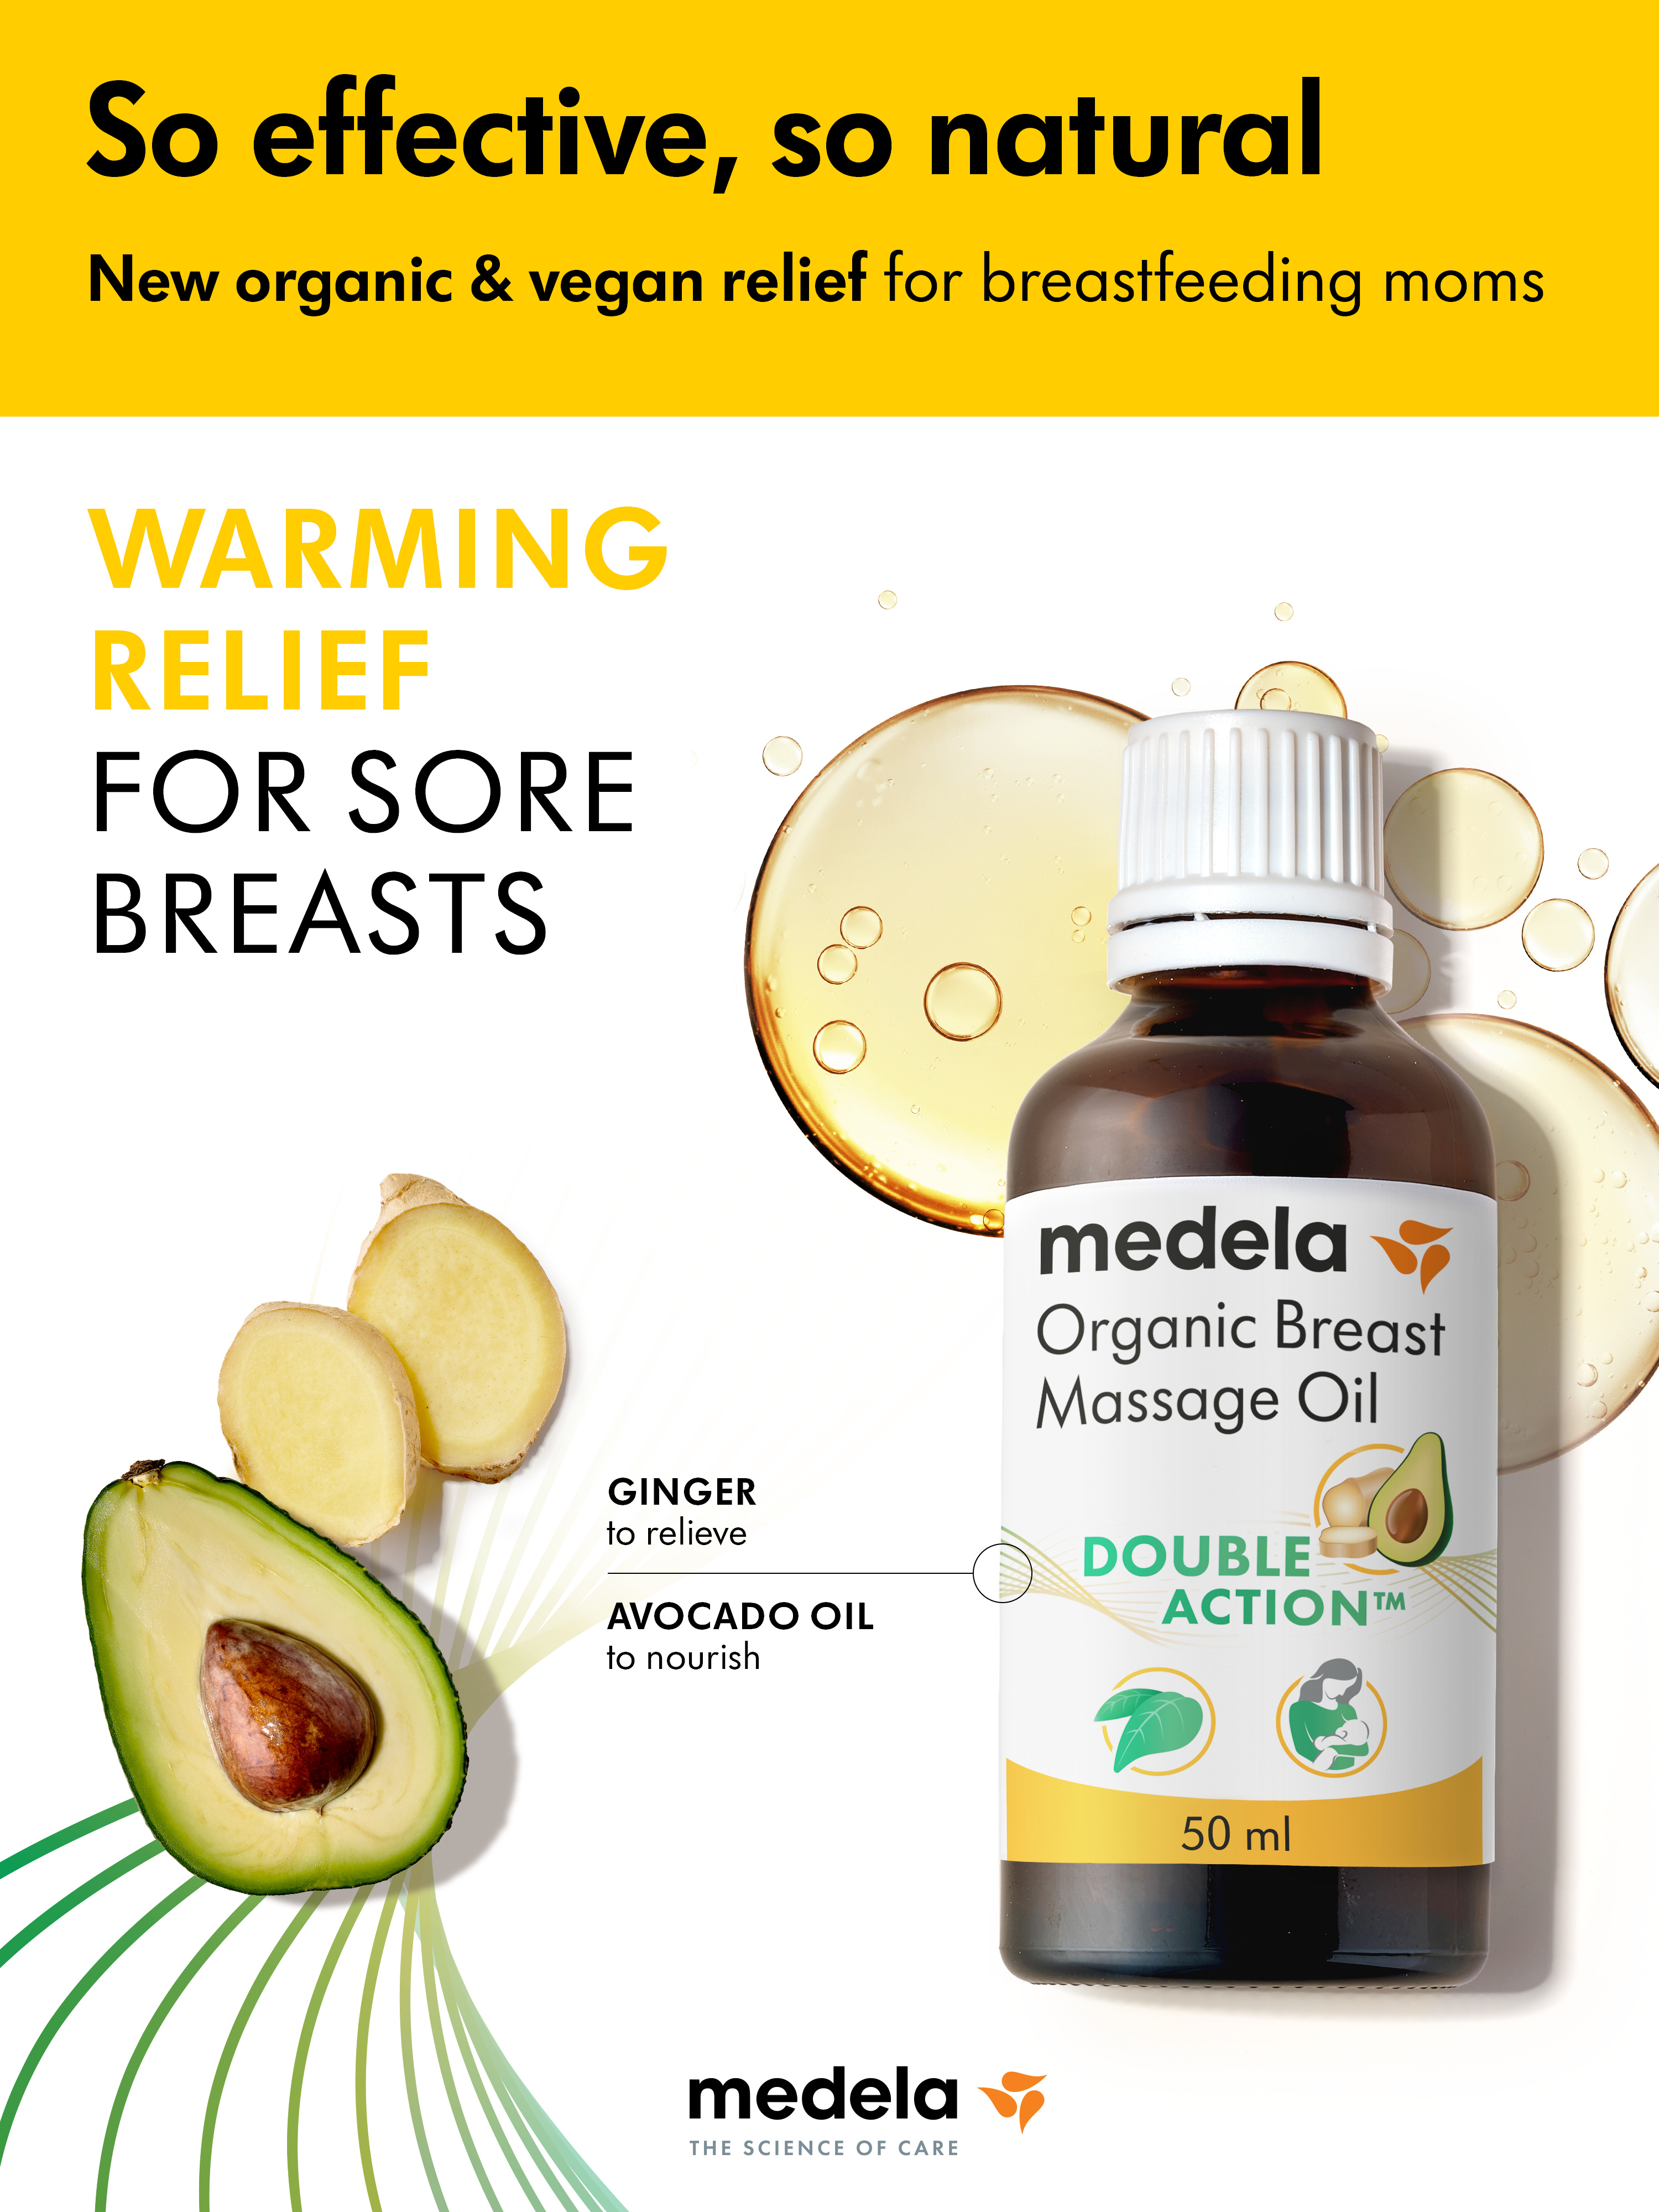 Medela Innovates to Meet Critical Gaps in Breastfeeding Support with New  Inclusive and Organic Products